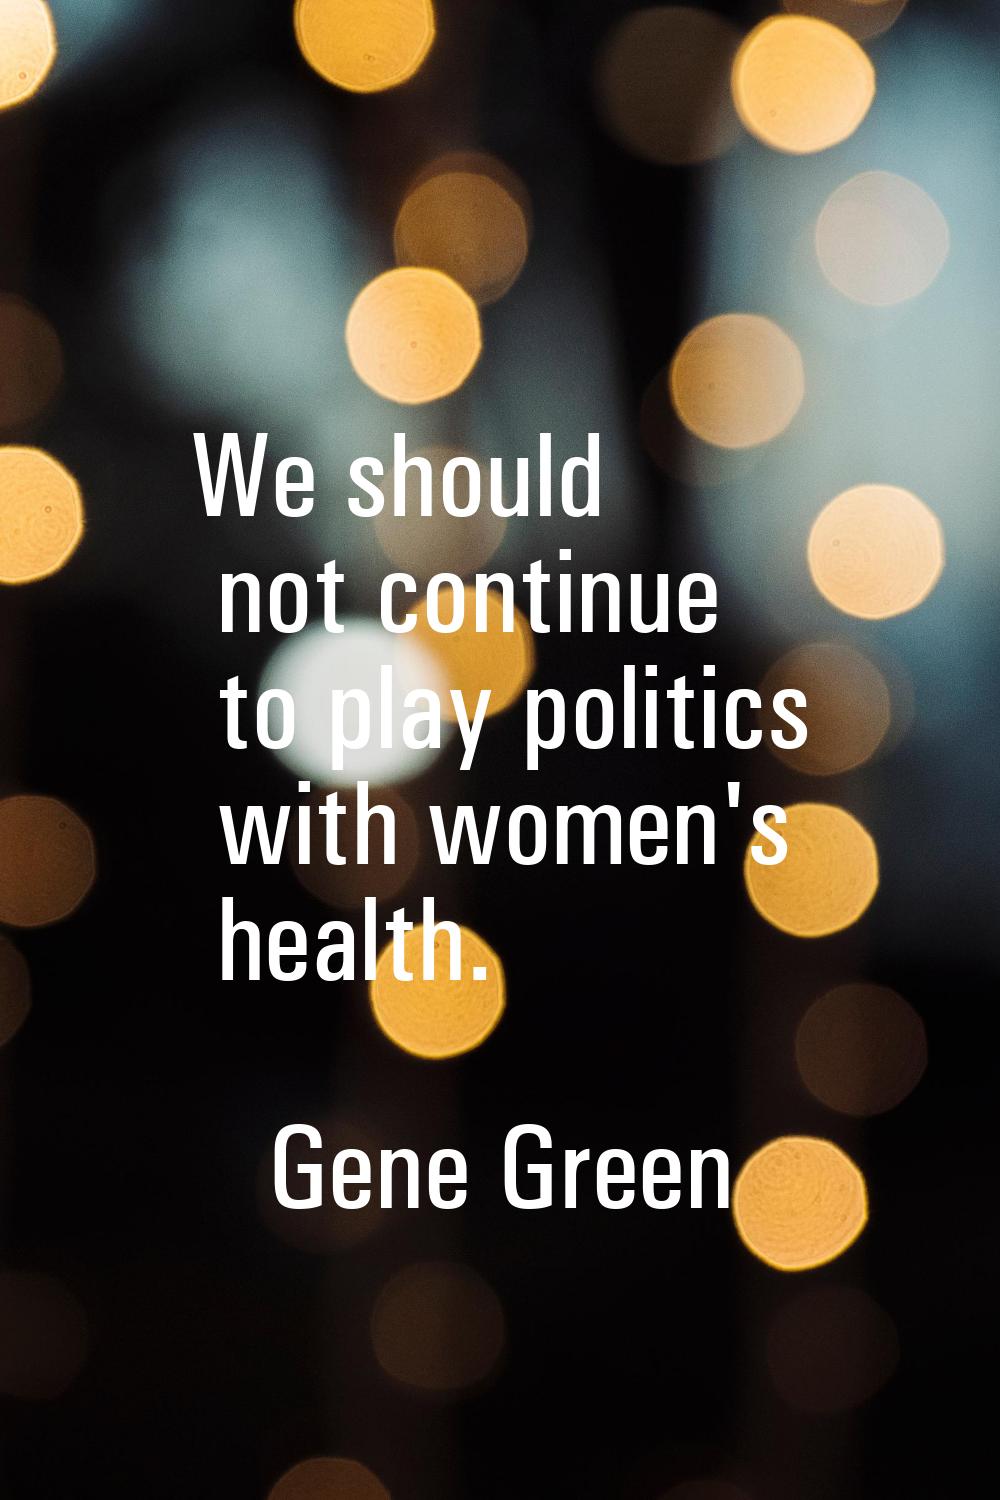 We should not continue to play politics with women's health.